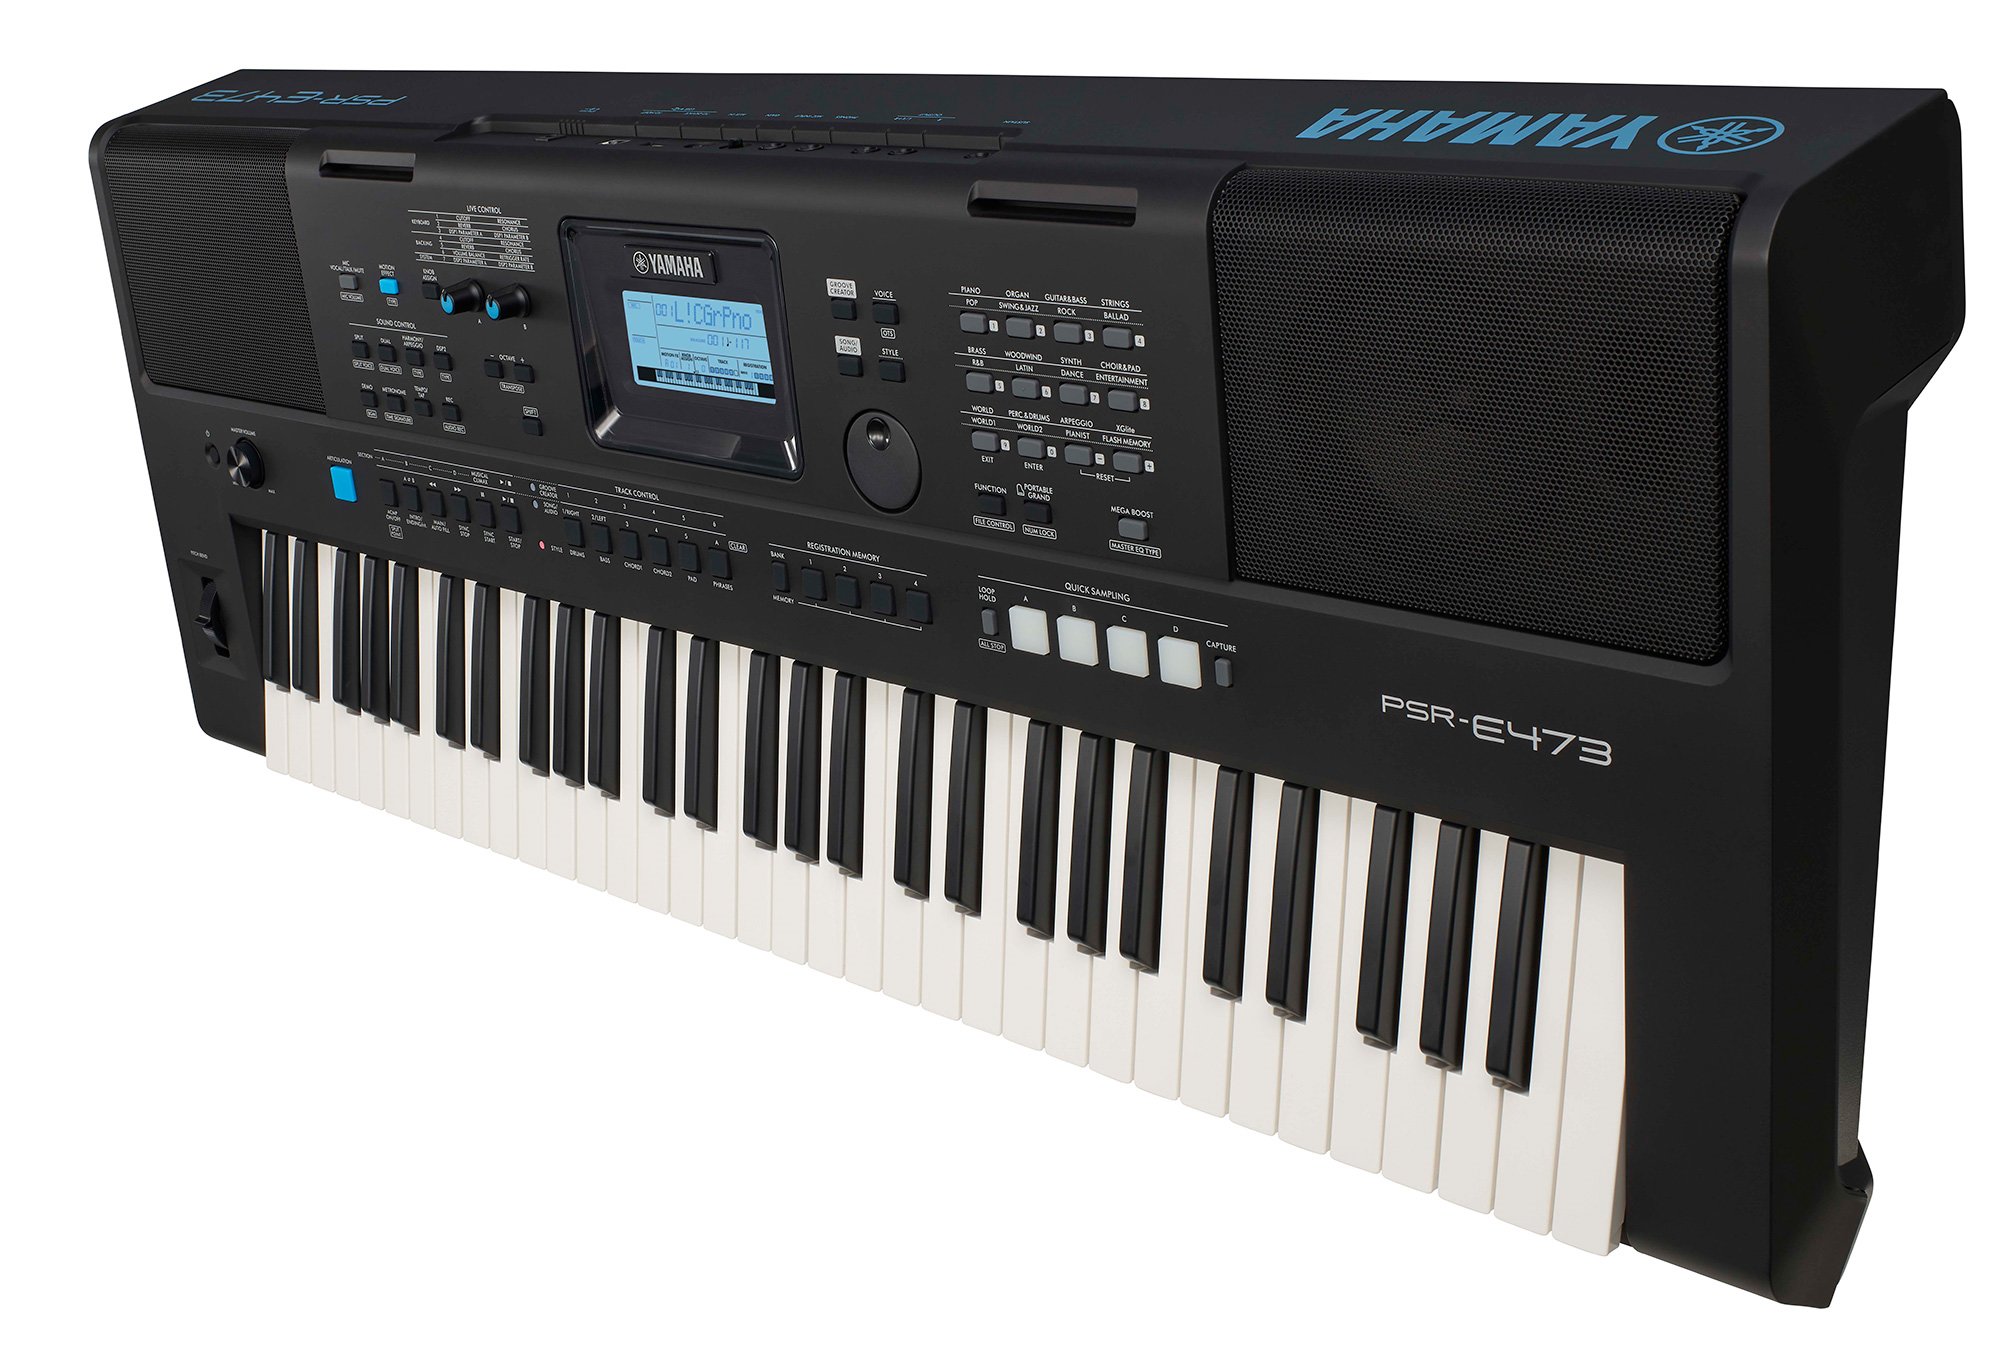 What Is The Newest Yamaha Digital Piano?